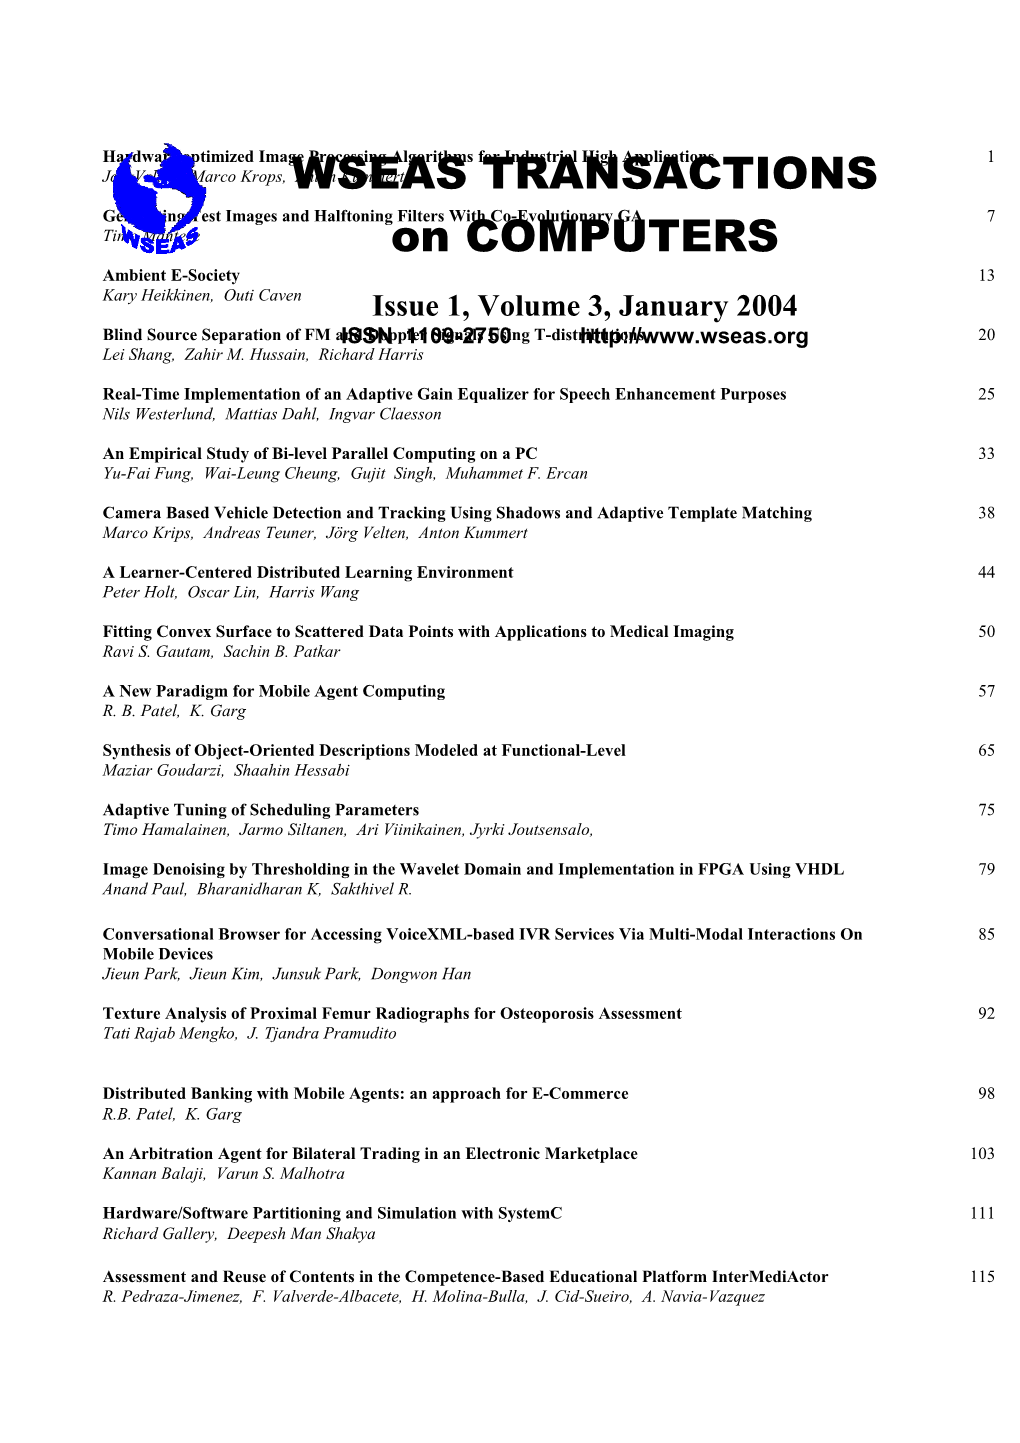 WSEAS Trans. on COMPUTERS, January 2004